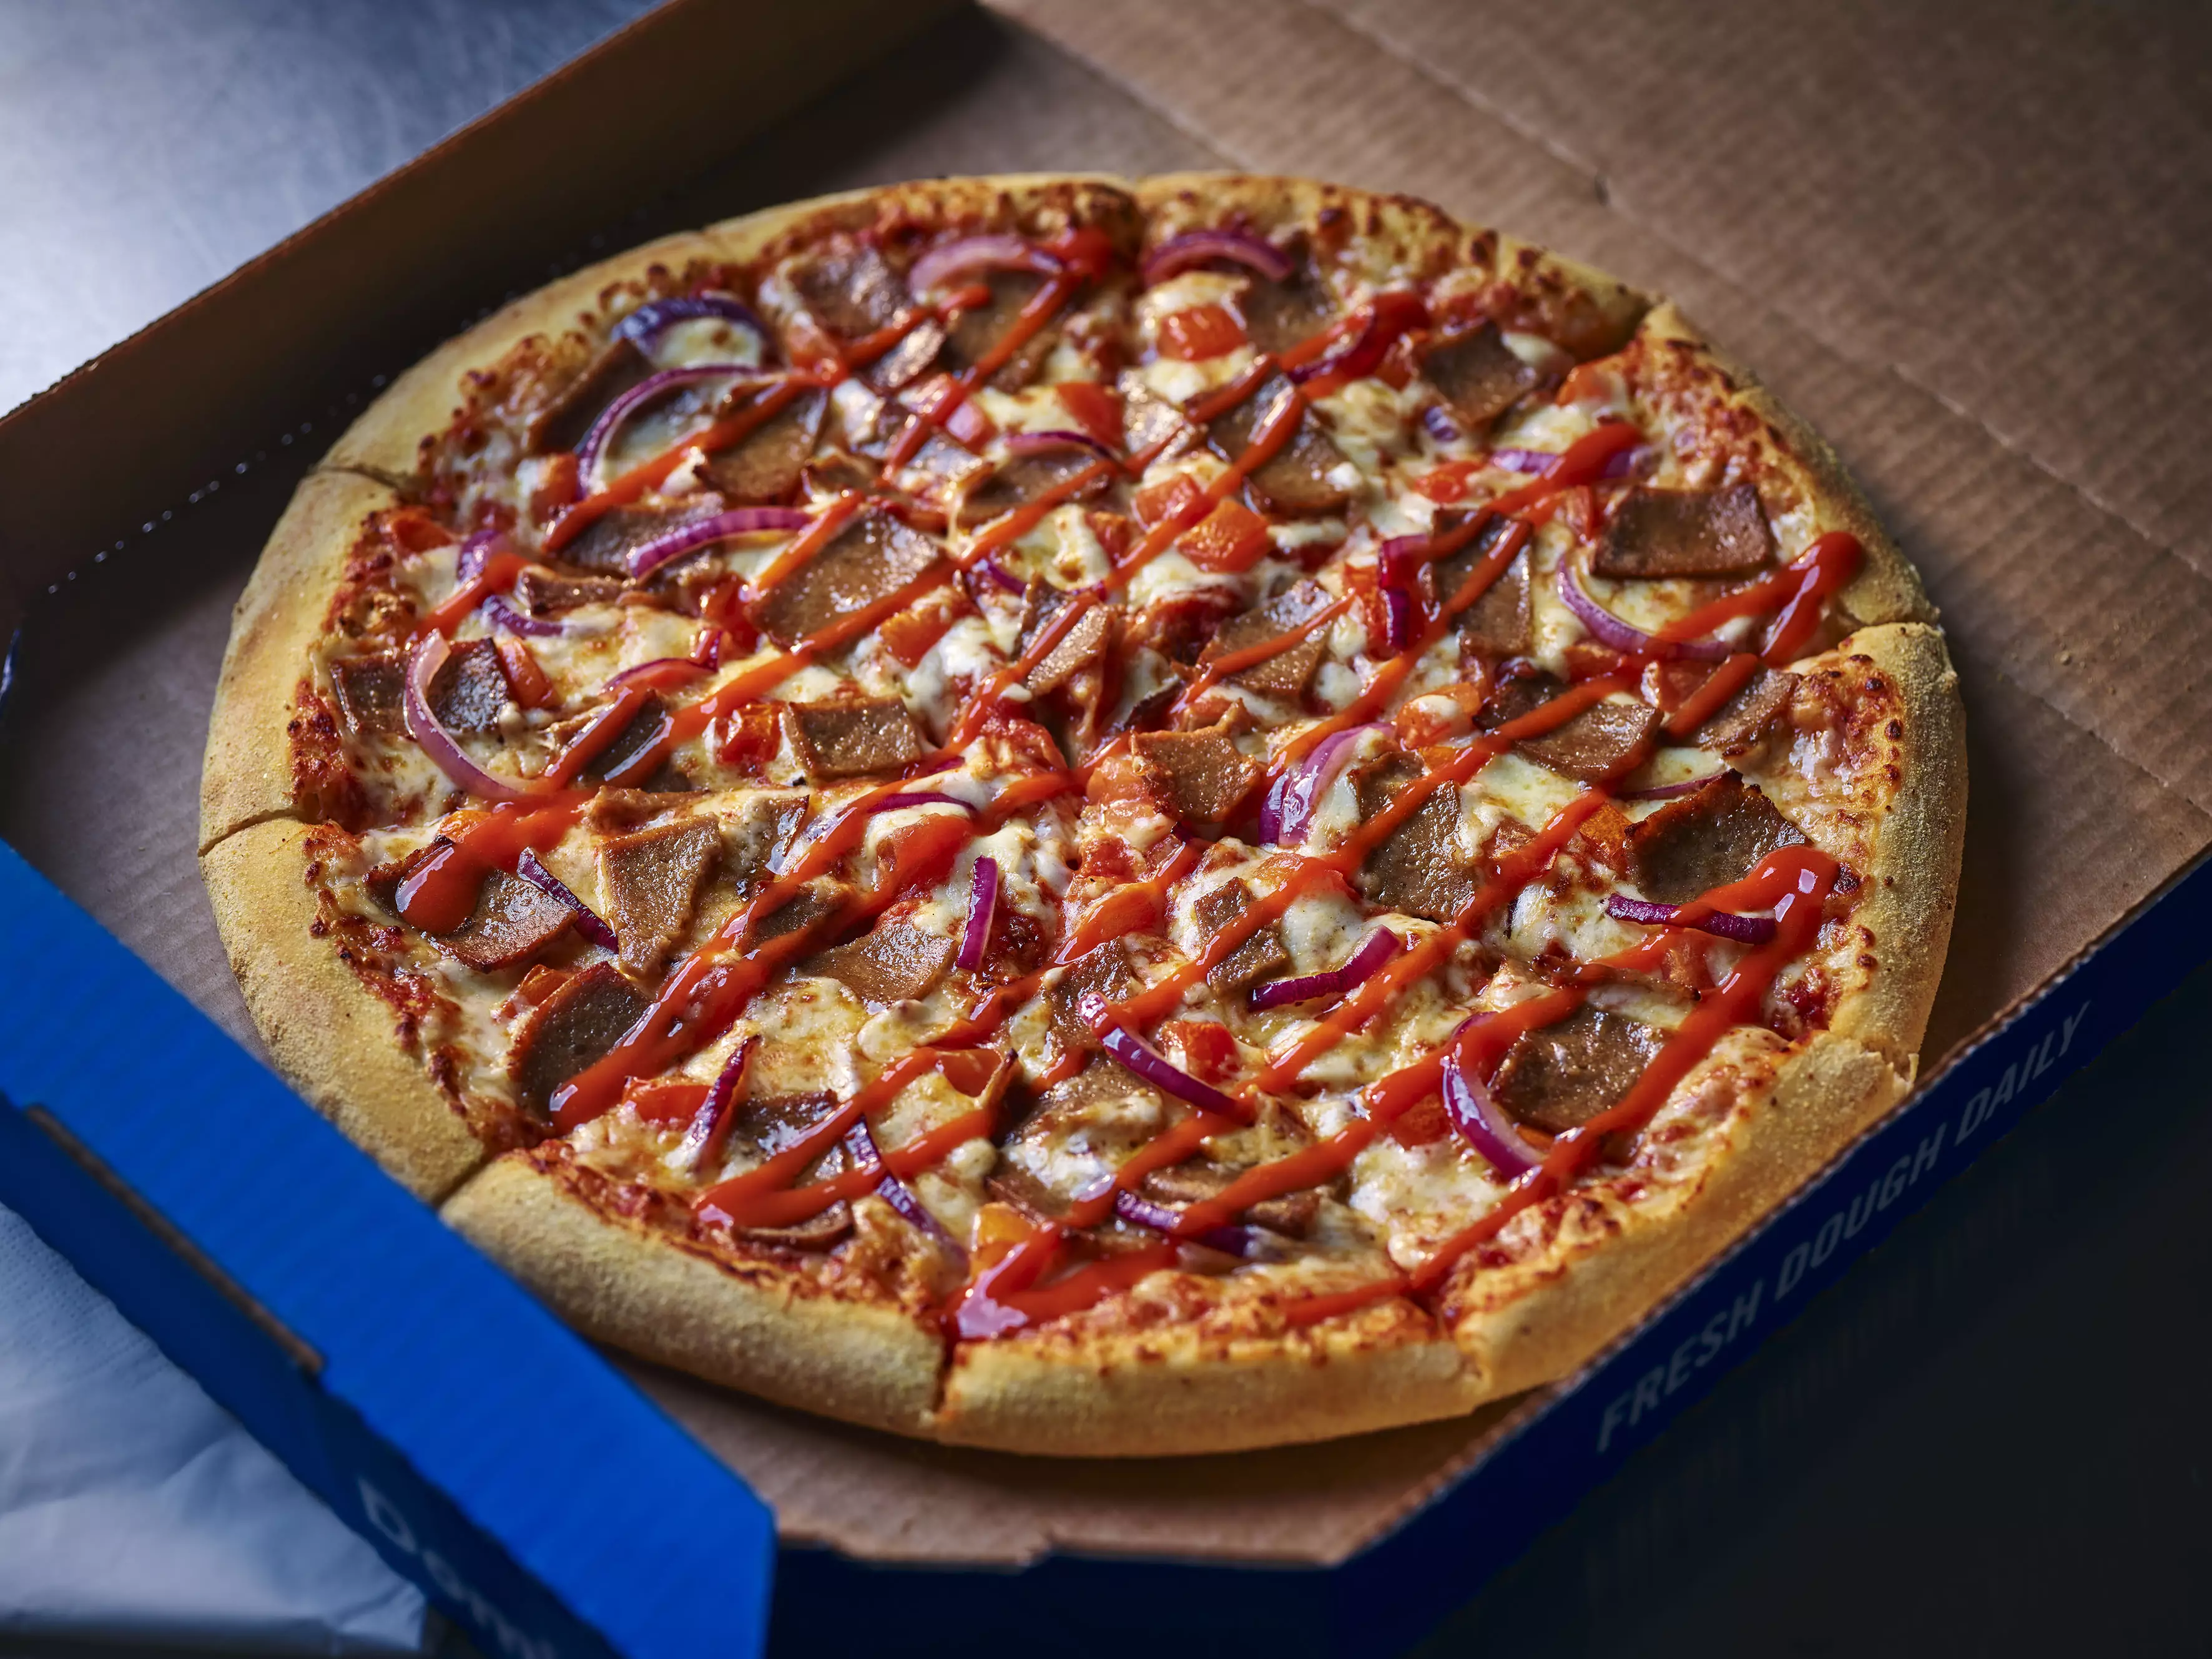 The new pizza features kebab meat (